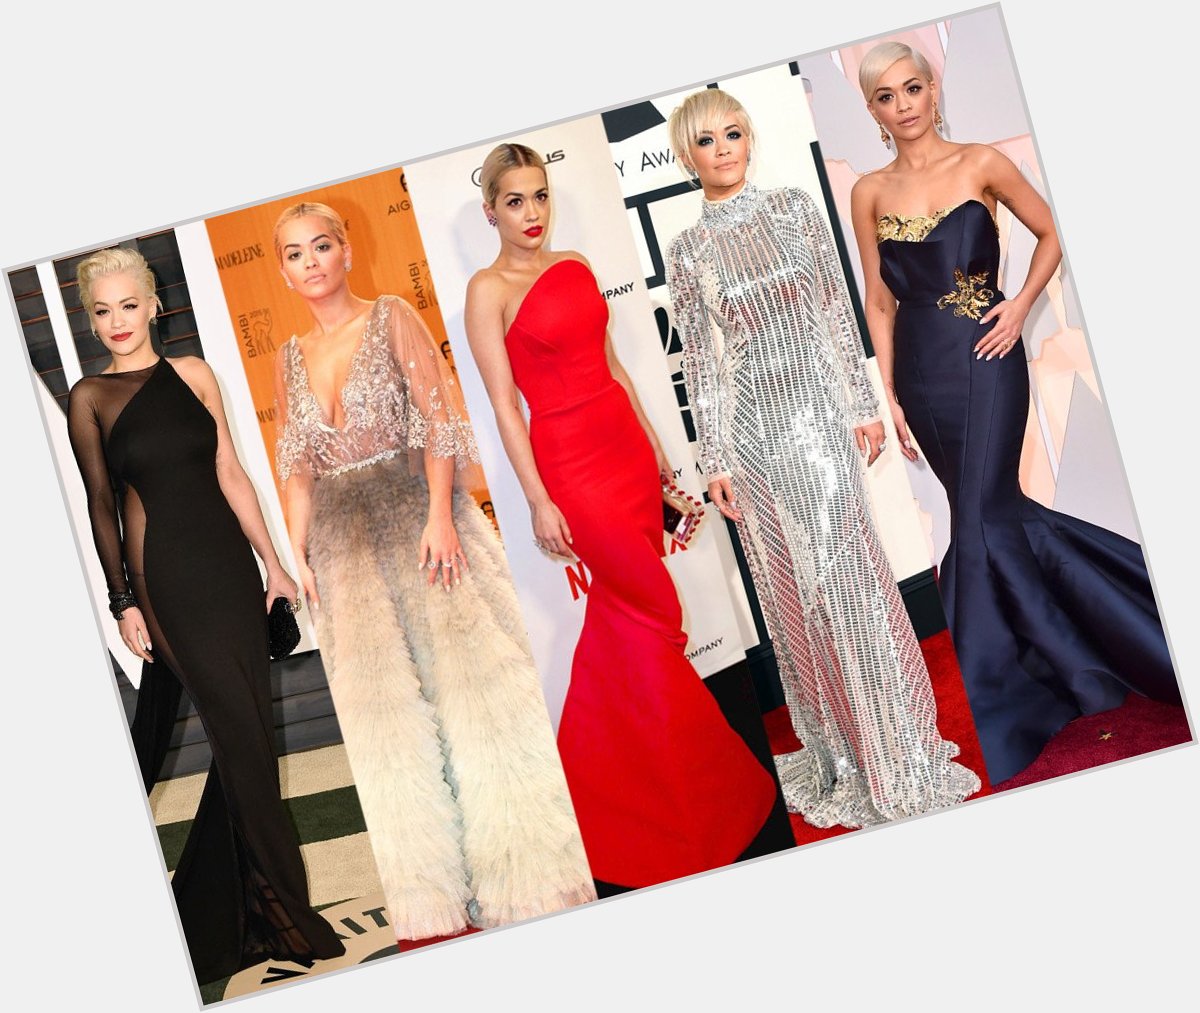  25th Birthday, Rita Ora! Check Out Her Many Unforgettable Styles  